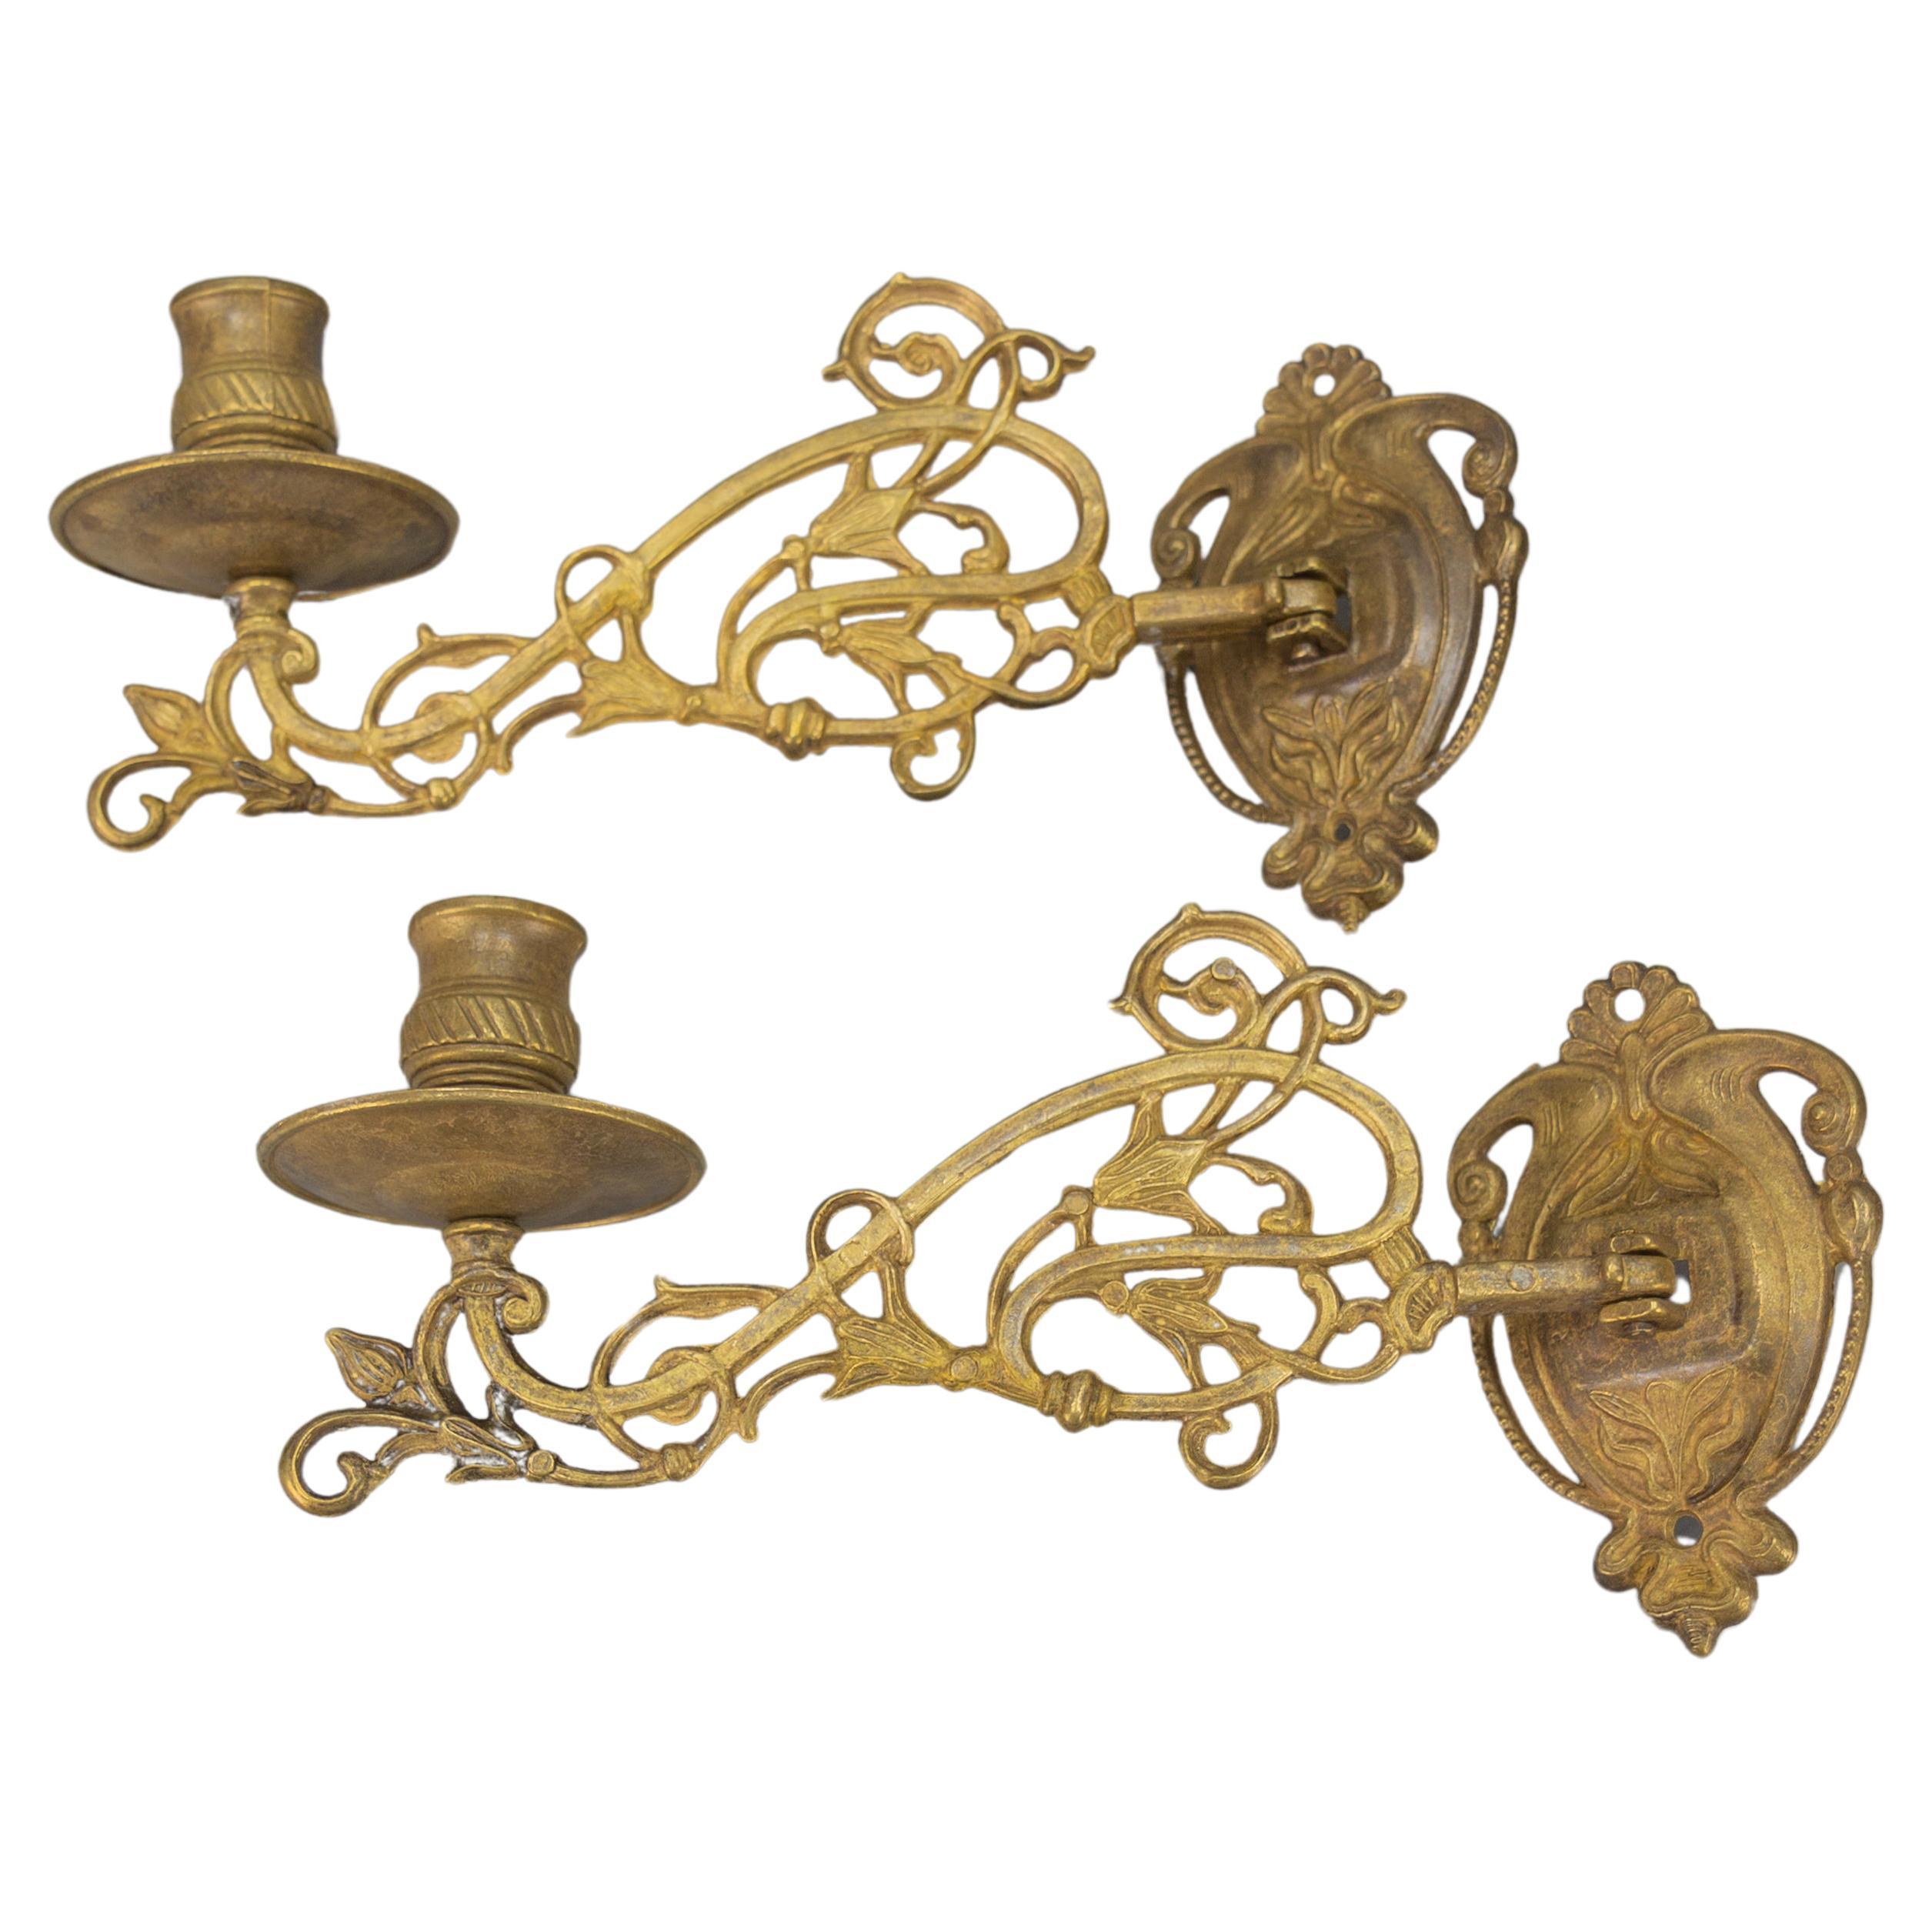 Pair of French Art Nouveau Style Piano Candlesticks or Wall Lights, 1950s